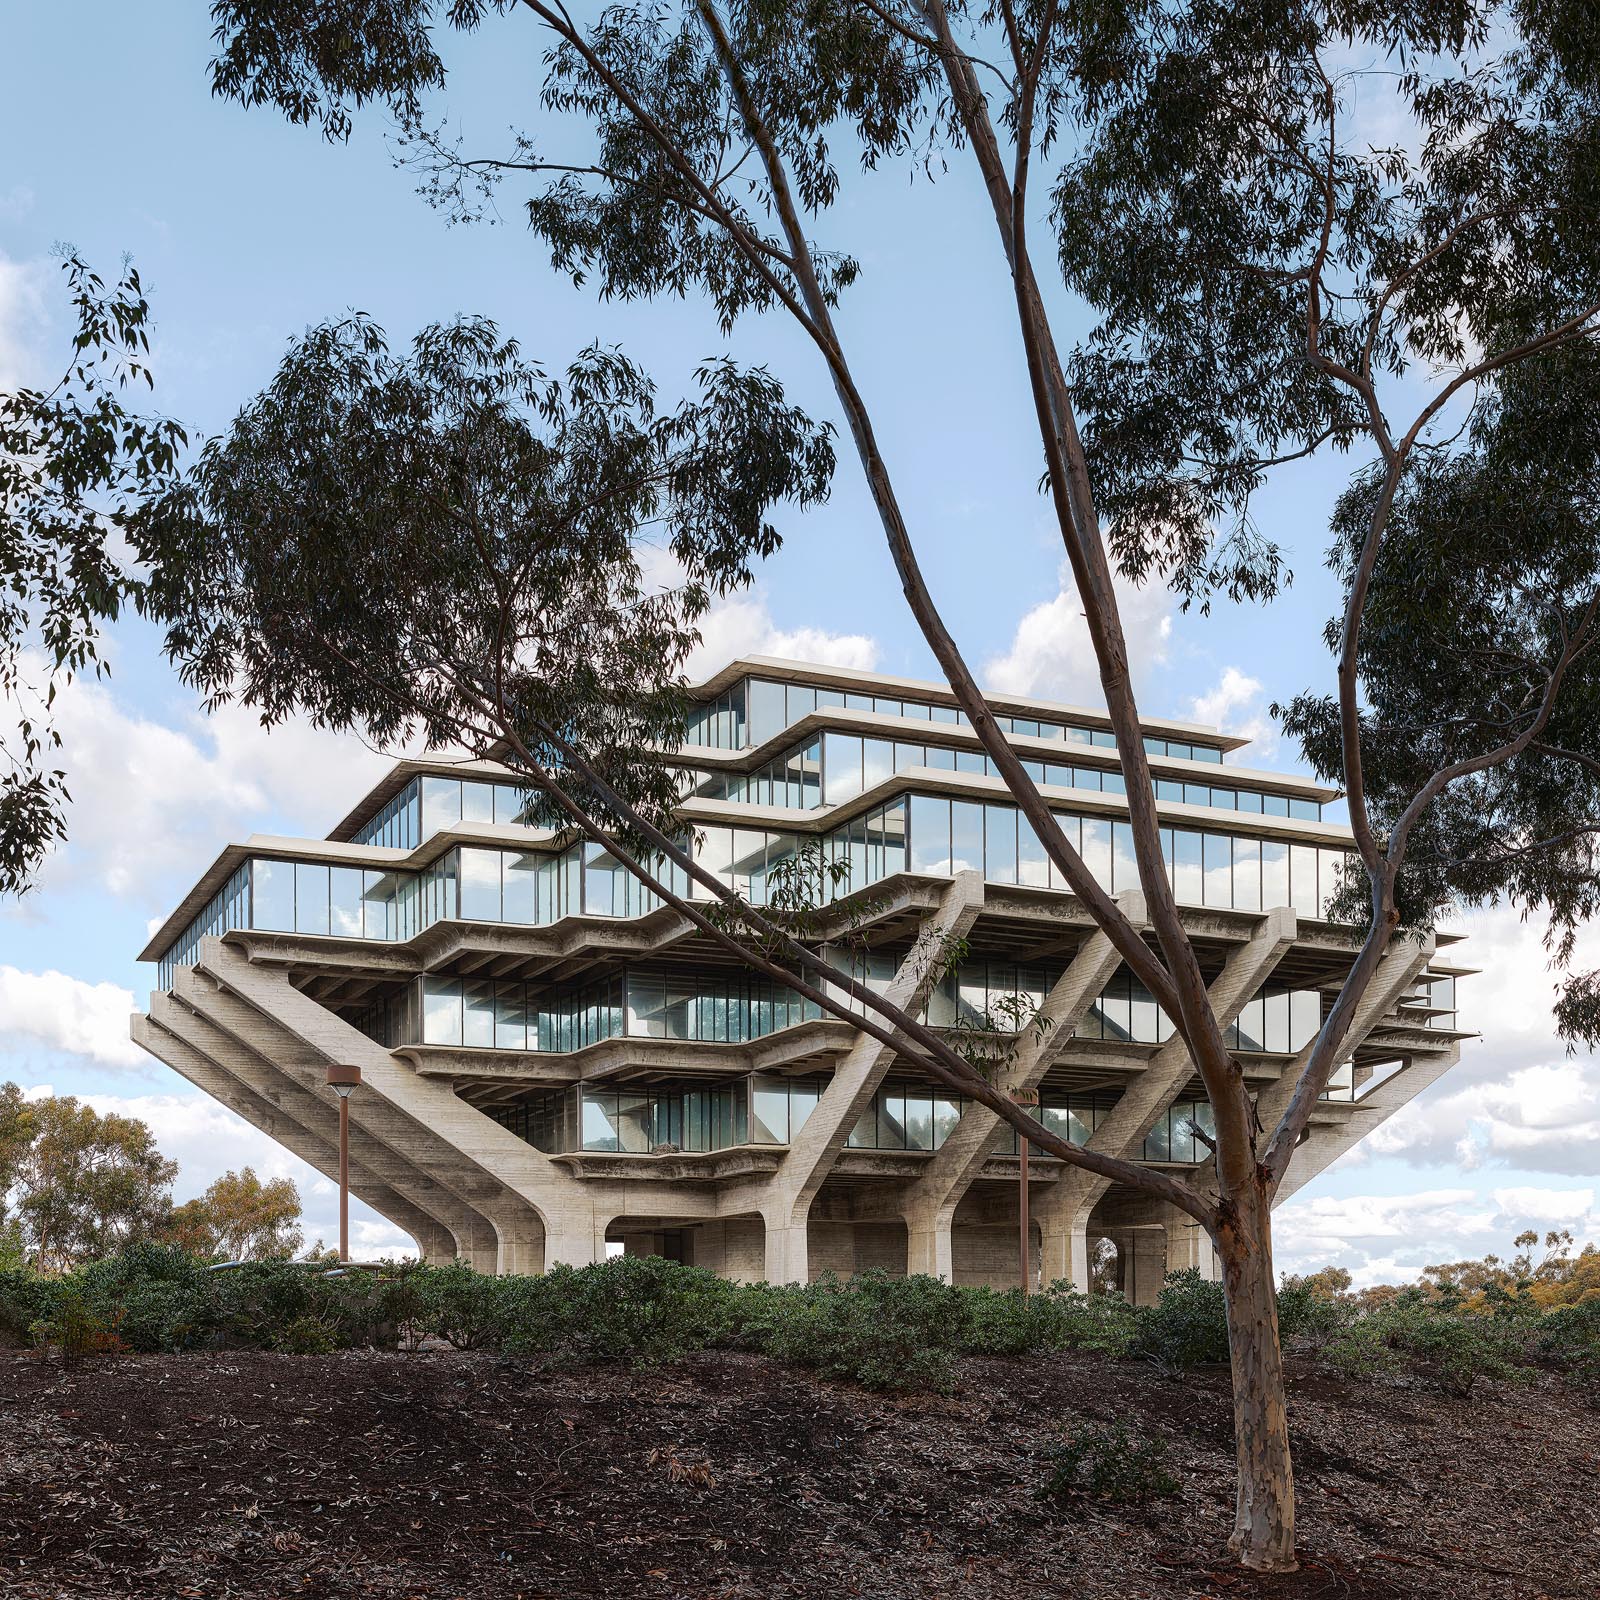 Architectural photography by Warren Diggles. Geisel Library, University of California San Diego.